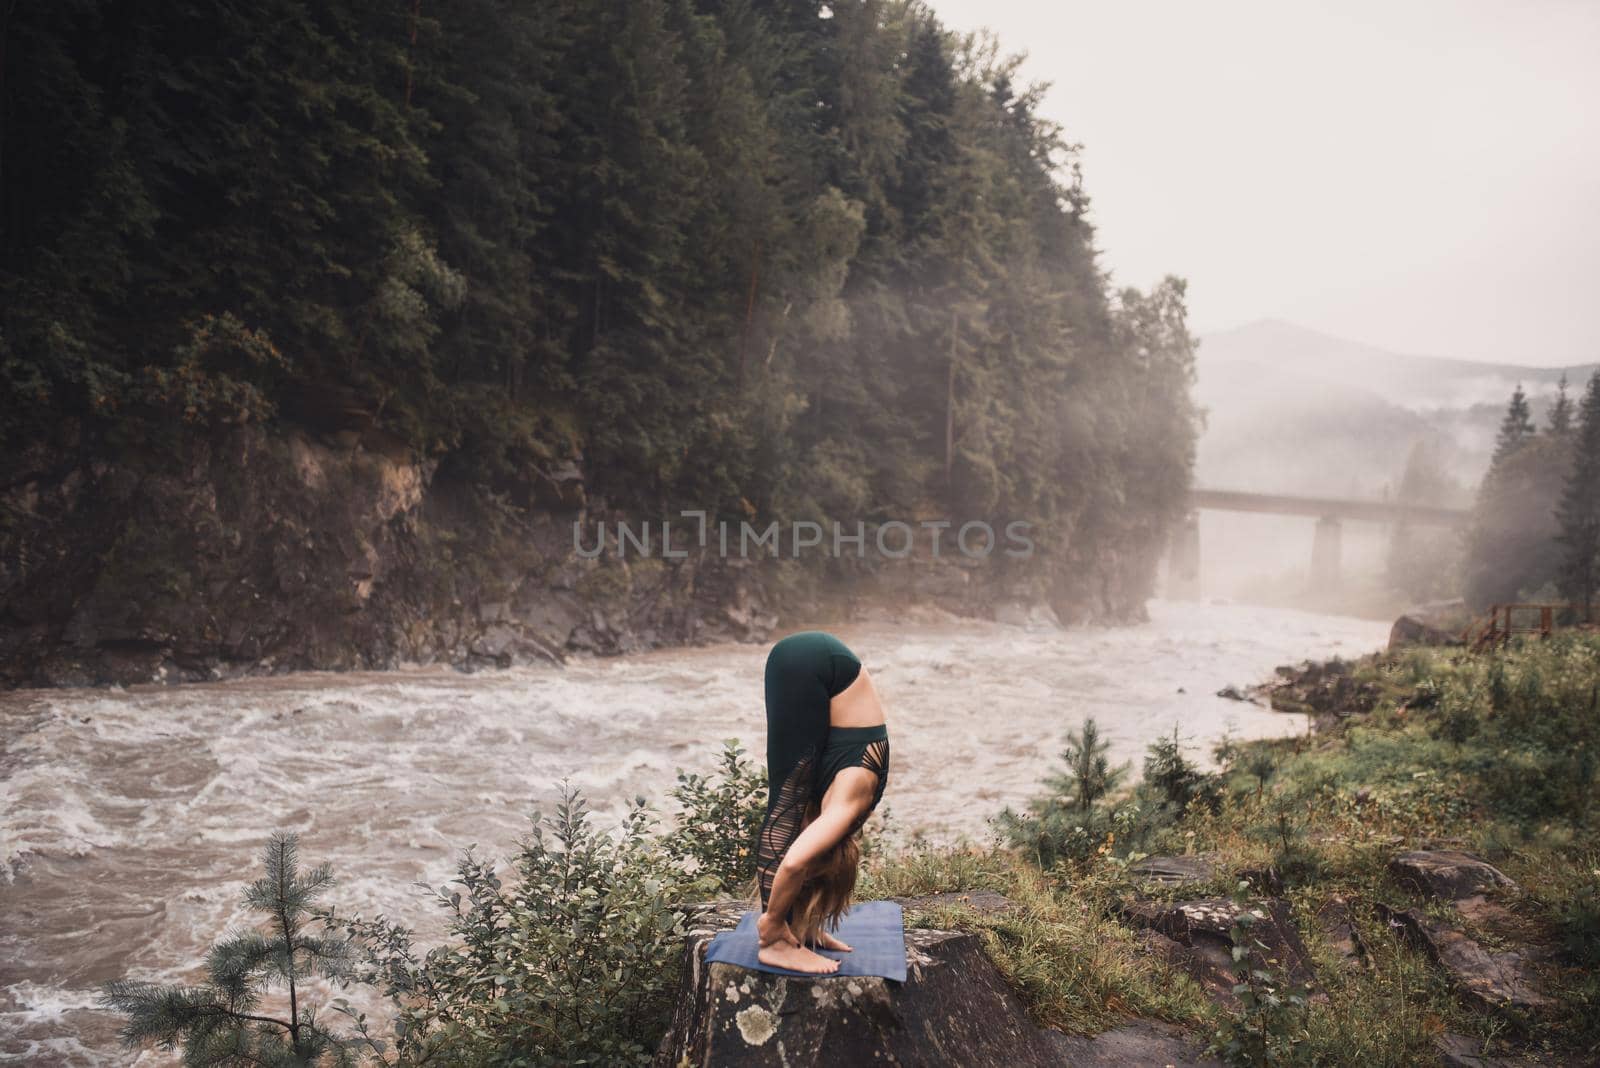 A young blonde woman practices yoga on nature on a stone near a raging river. Green tracksuit.